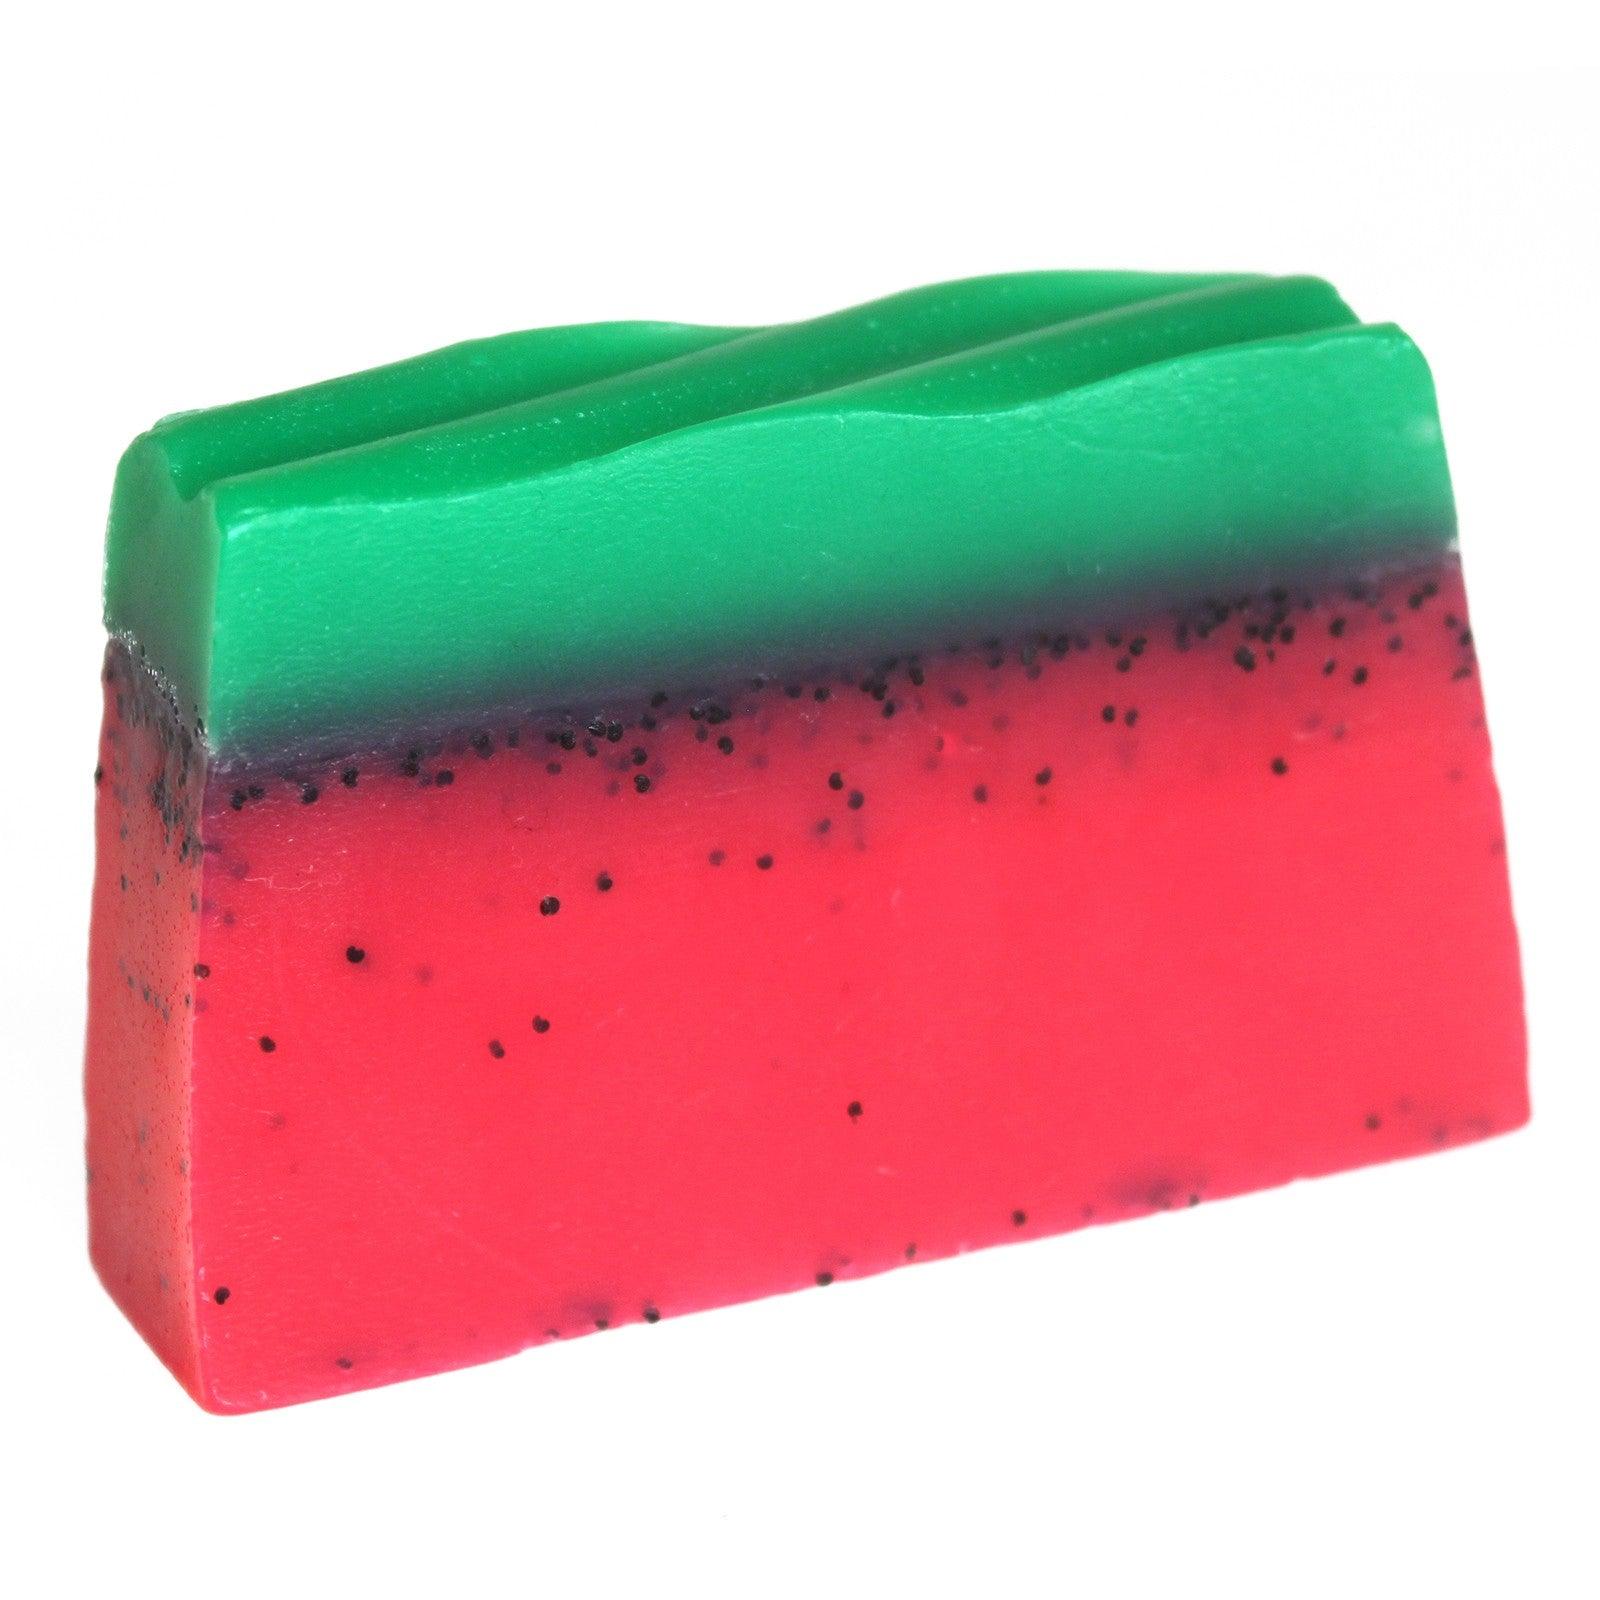 Tropical Paradise Soap Loaf - Watermelon - Charming Spaces